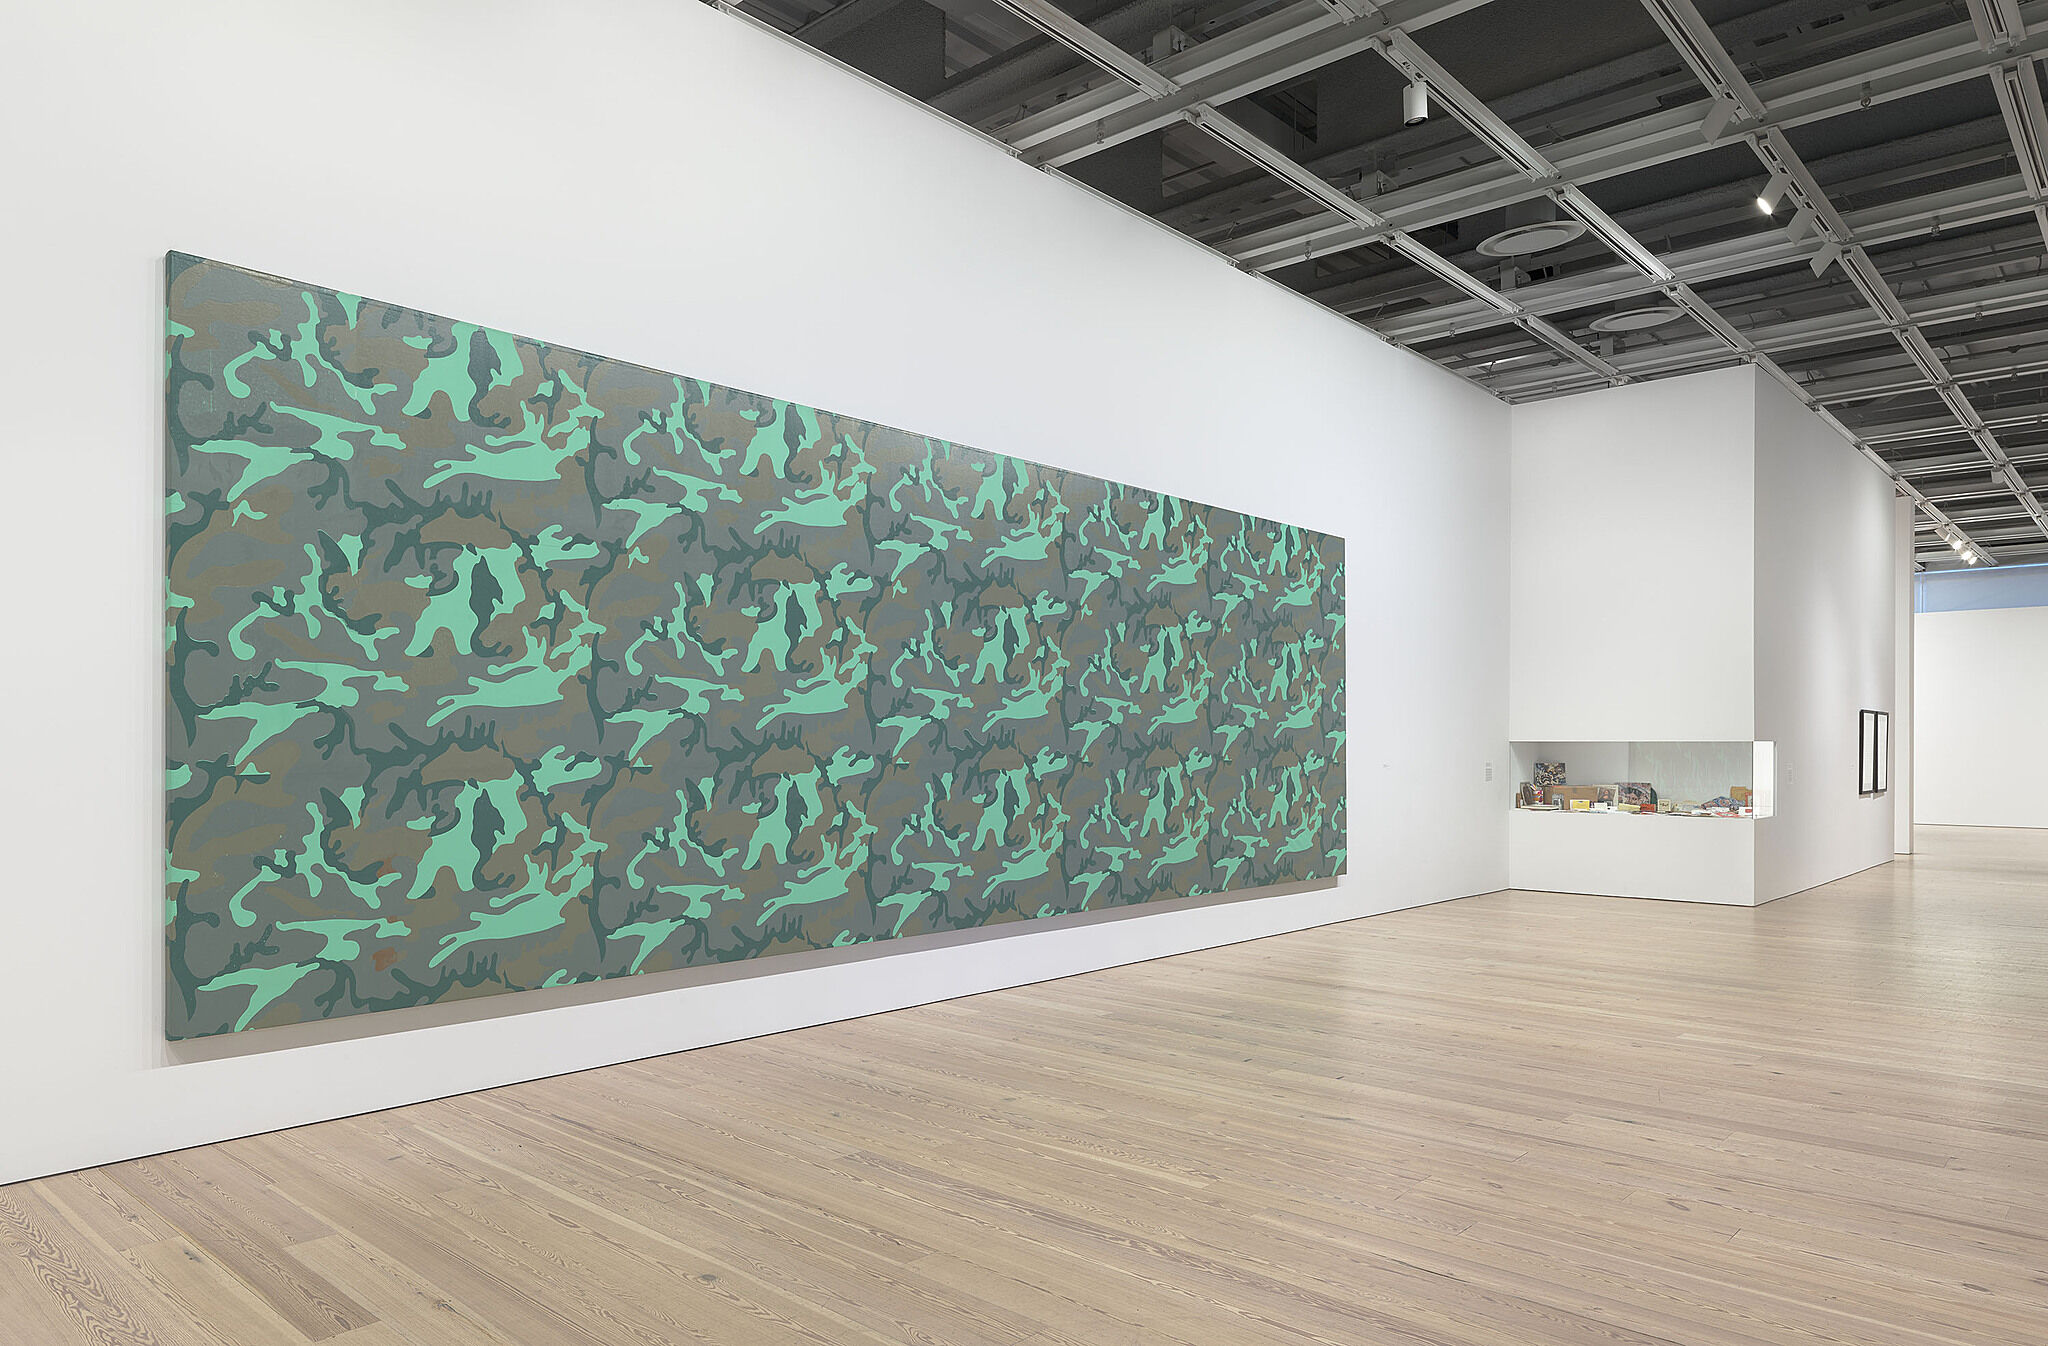 A photo of the Whitney galleries with a large painting on the wall.